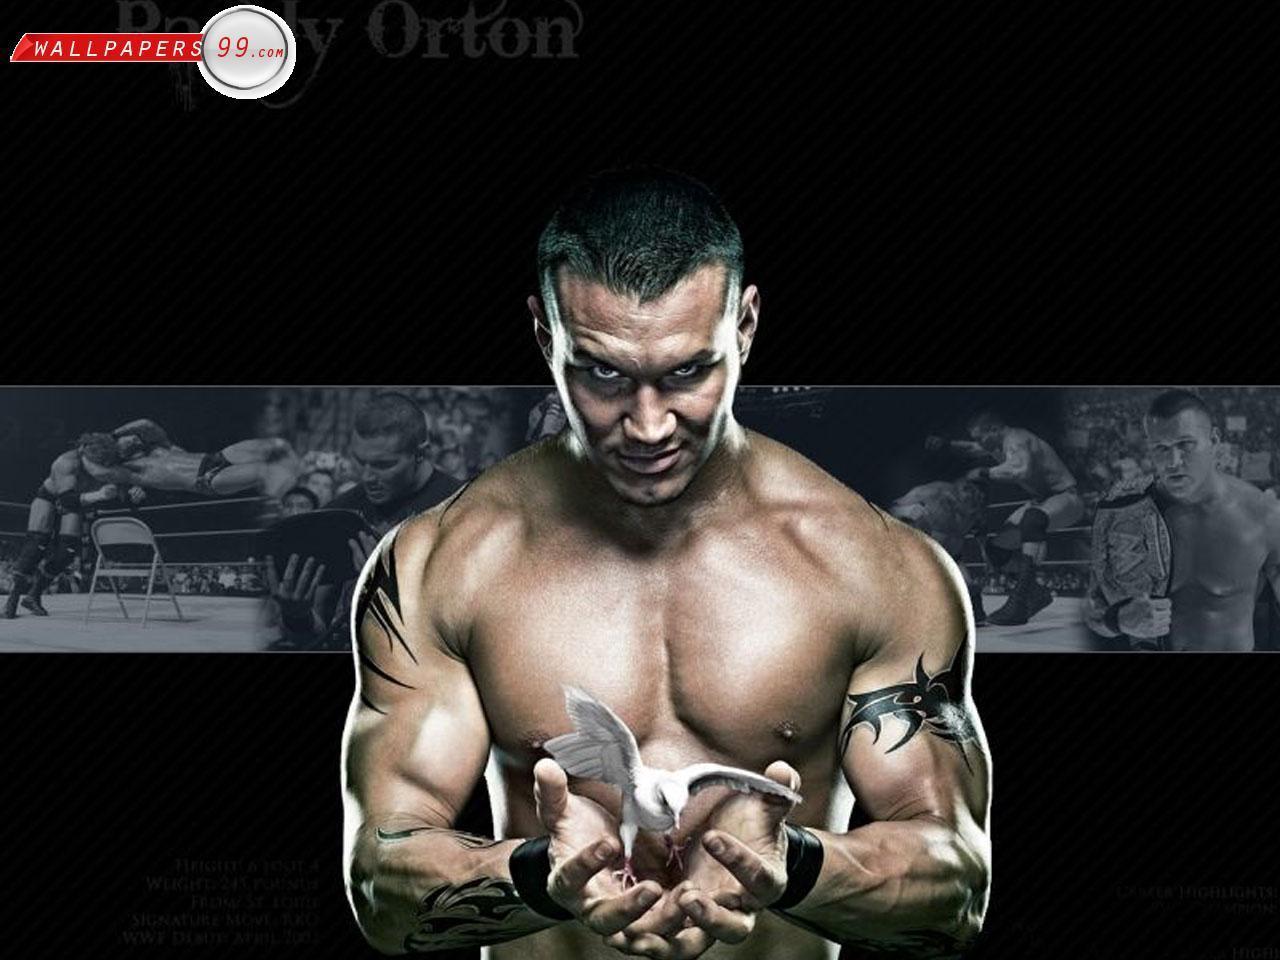 Randy Orton Wallpapers Picture Image 1280x960 30406.